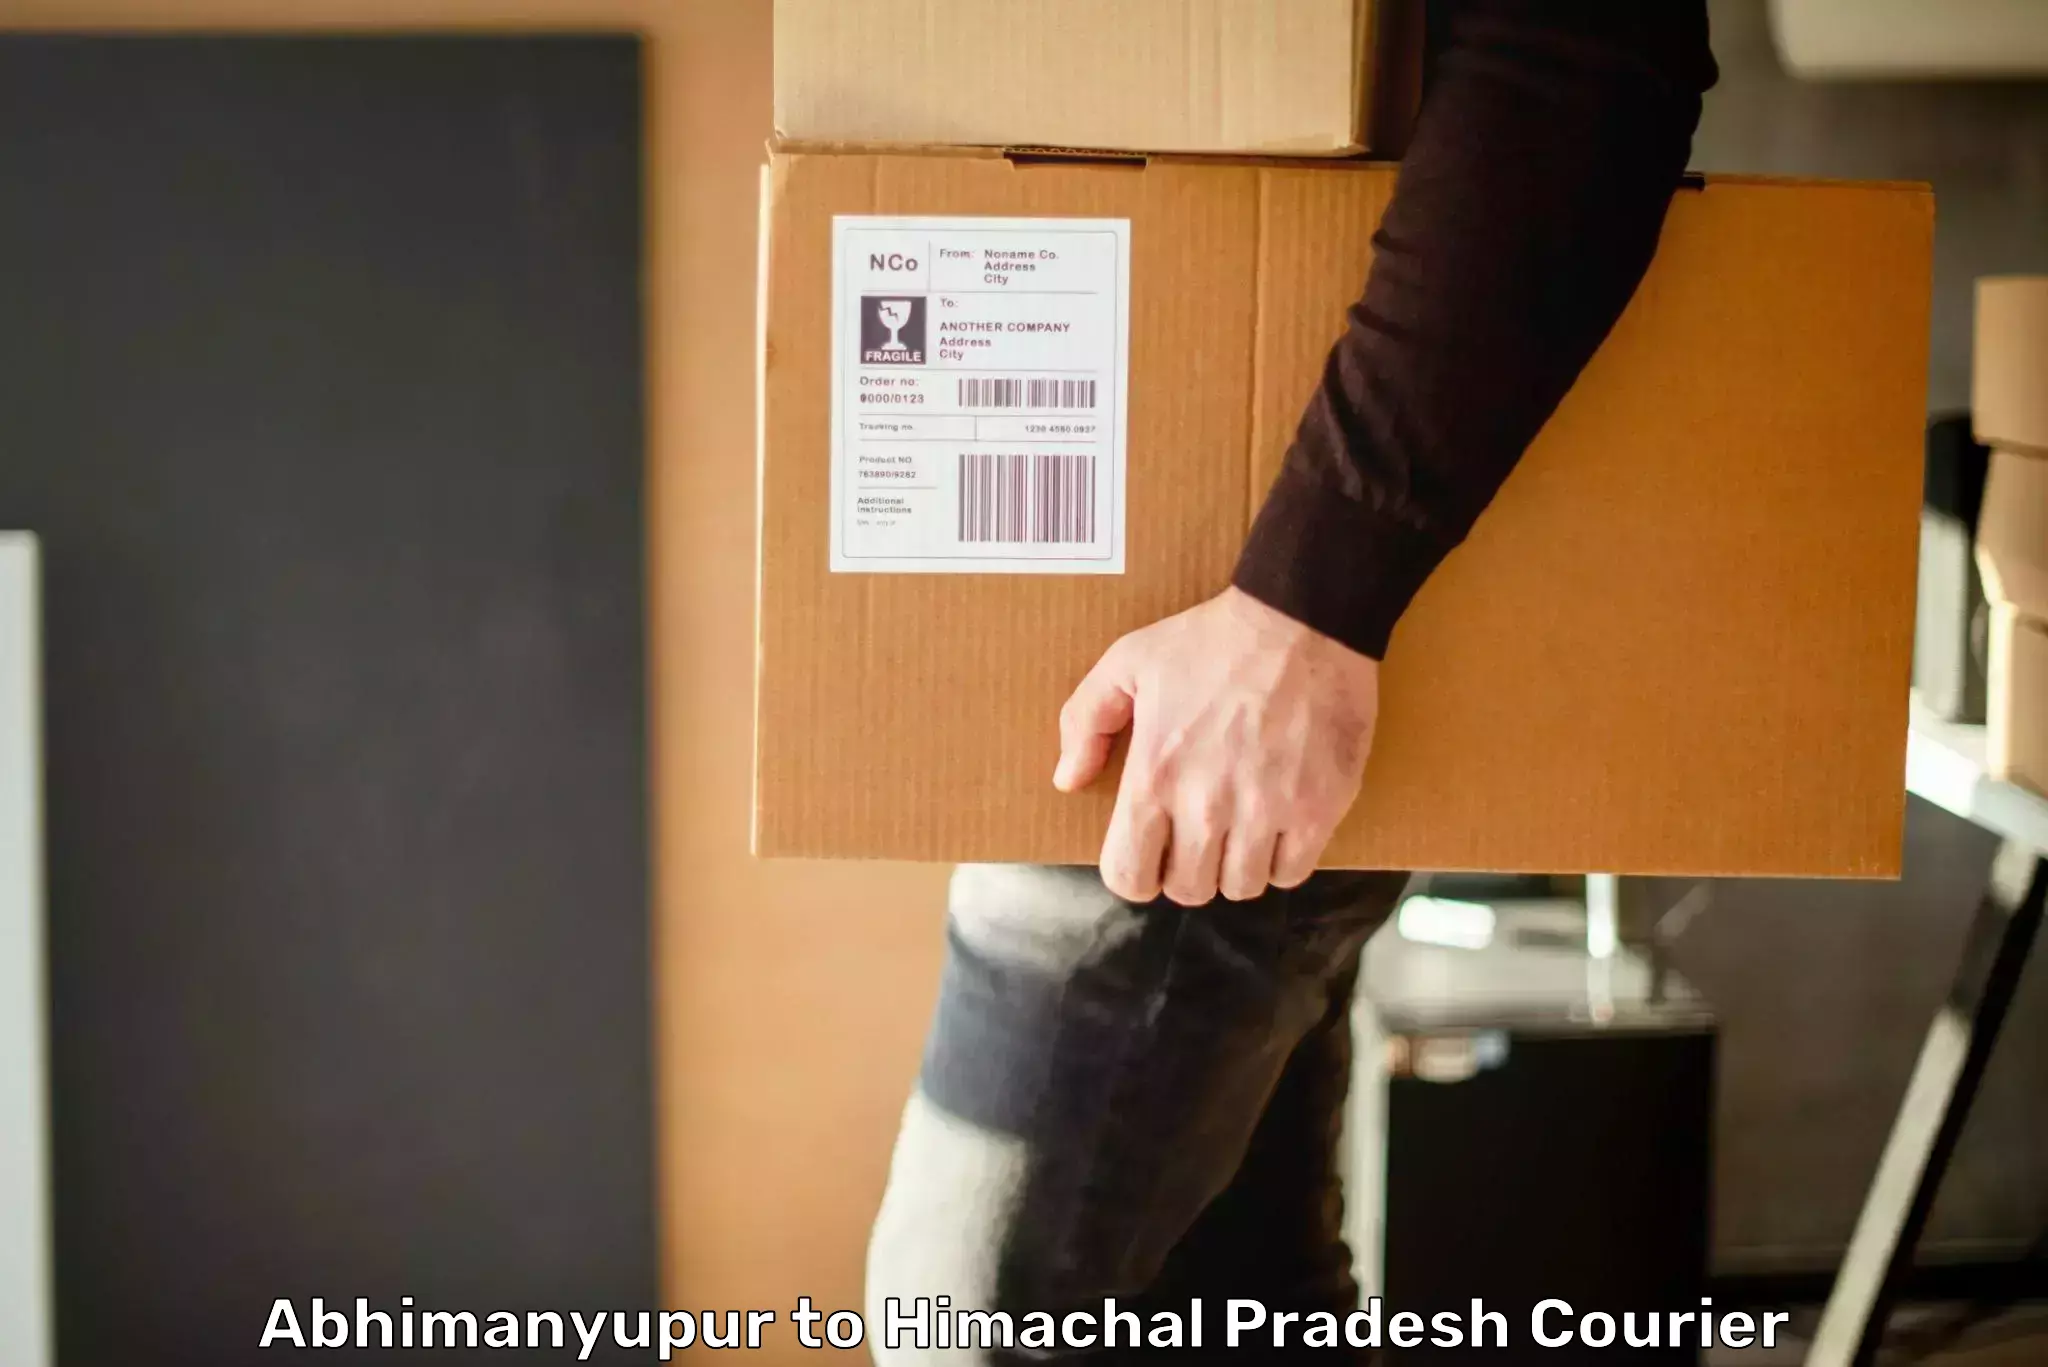 Fast-track shipping solutions Abhimanyupur to Himachal Pradesh